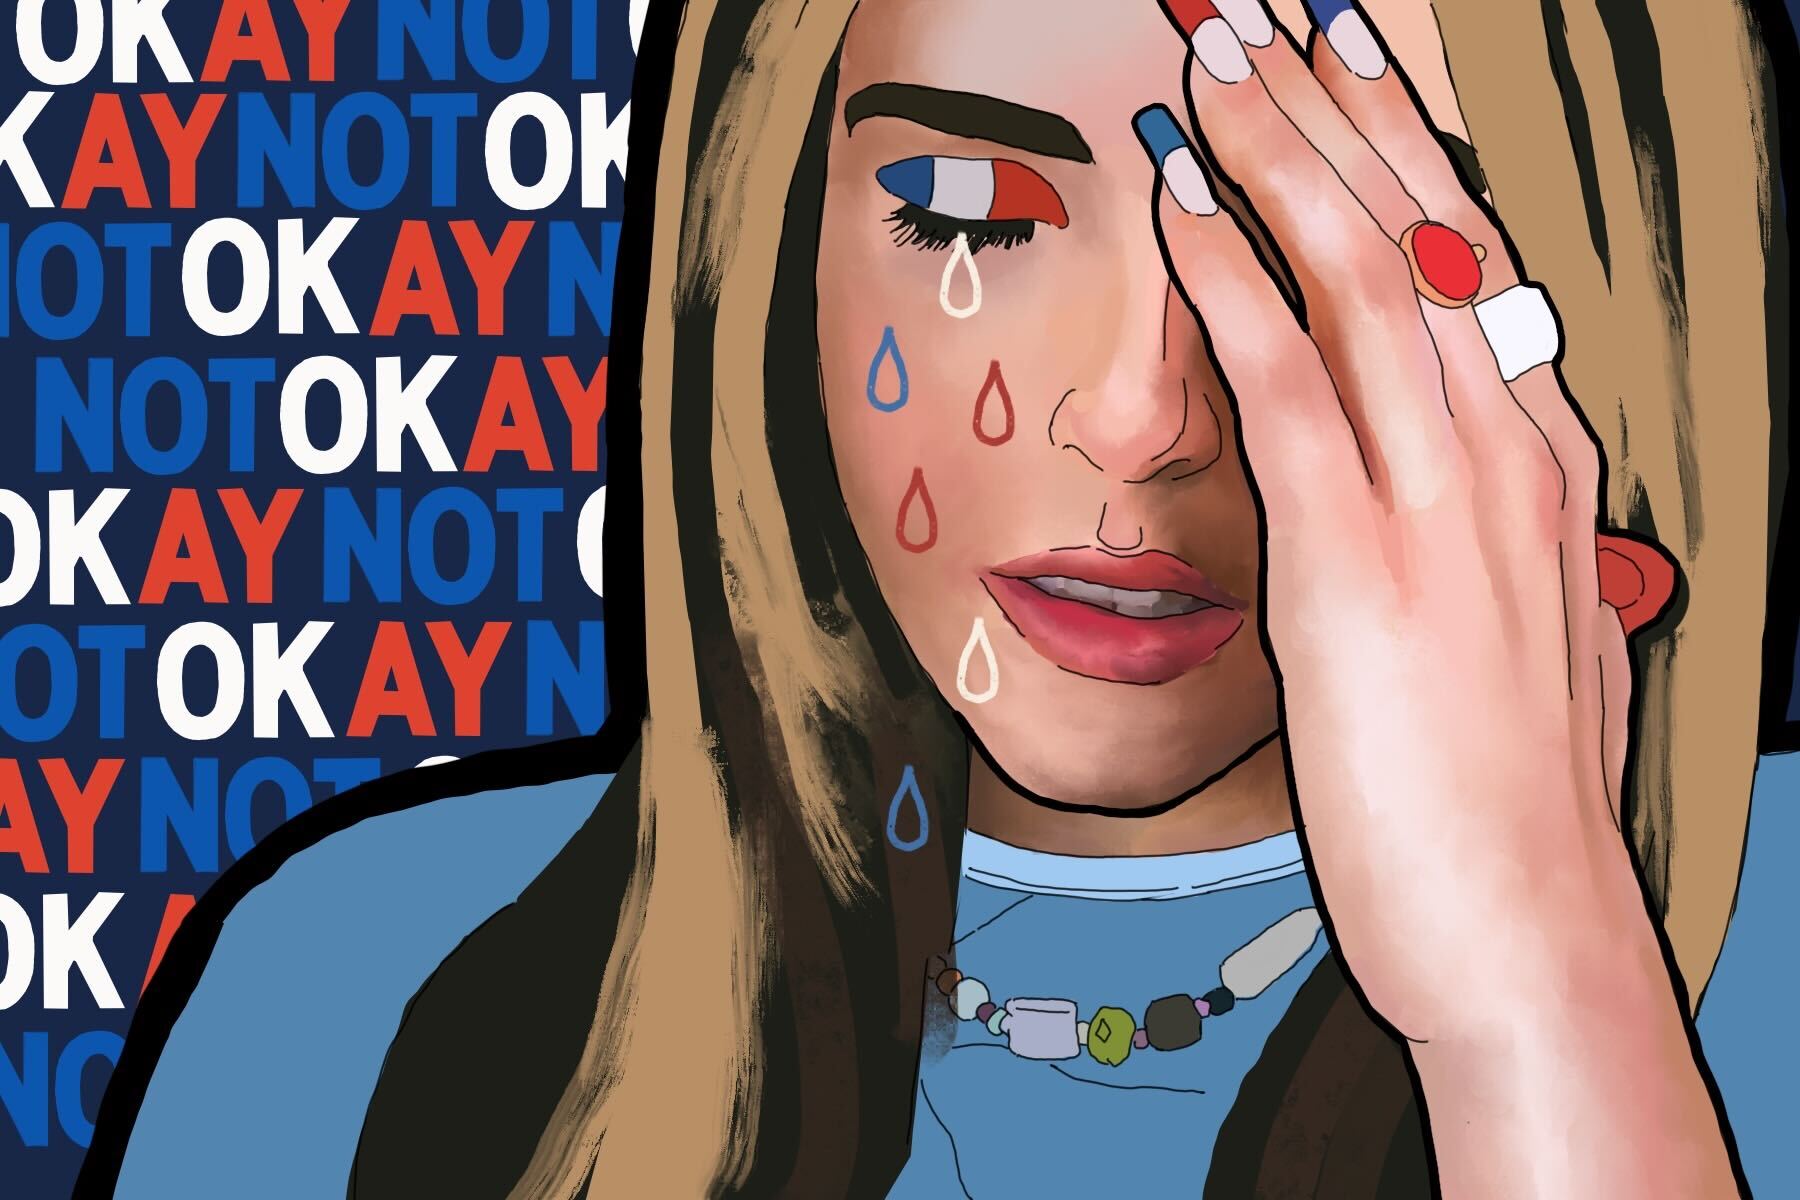 in an article about not okay, an illustration of a person crying